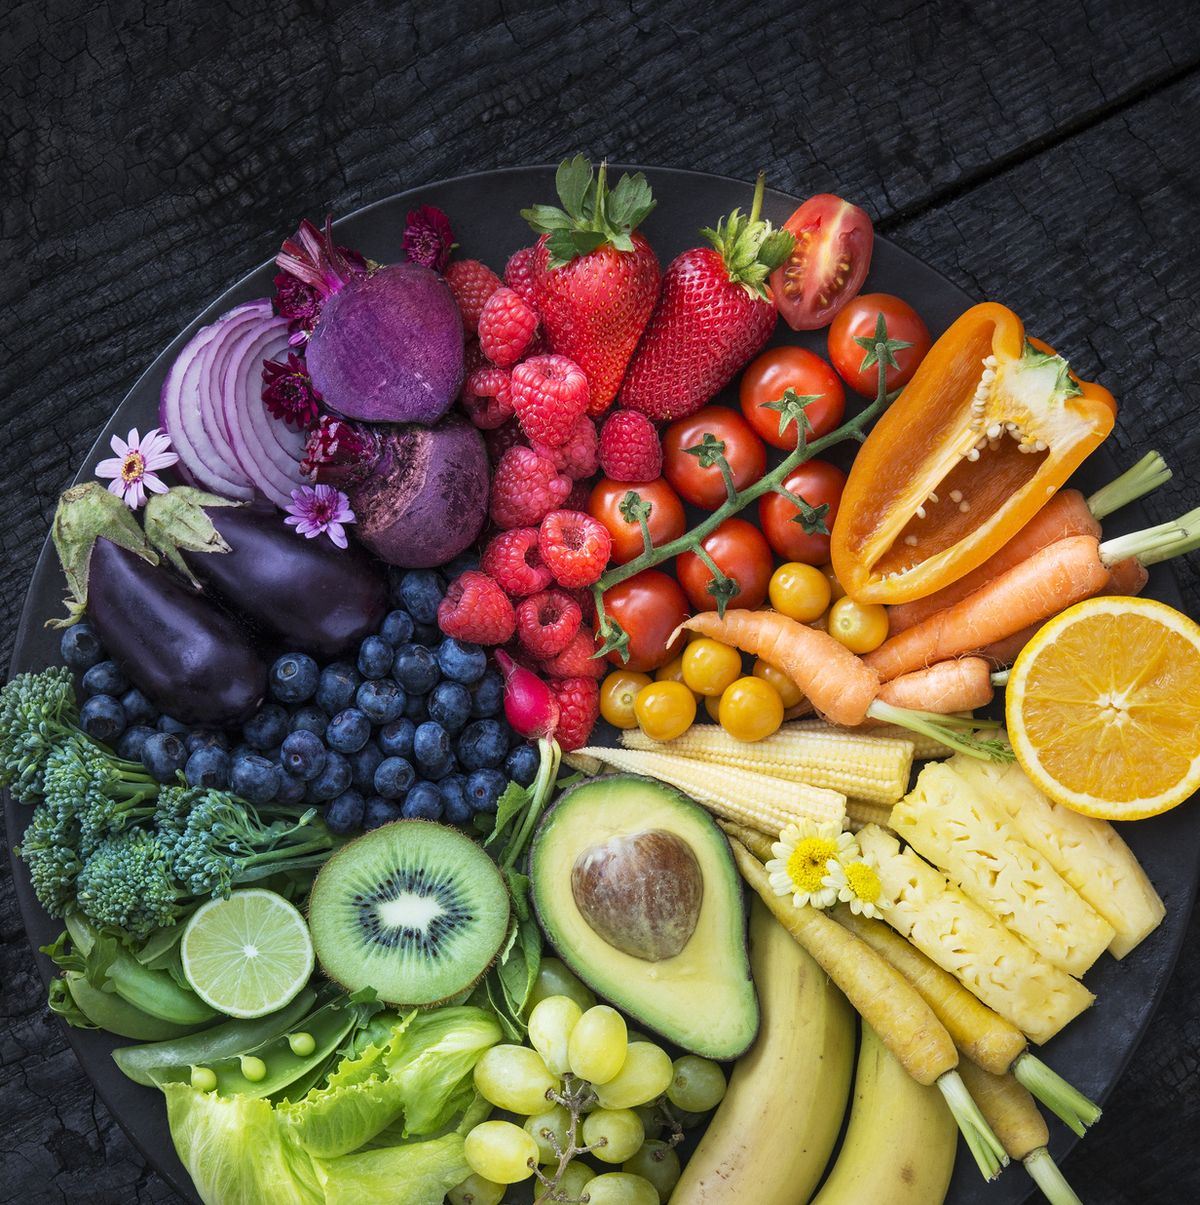 How Many Servings of Fruits and Vegetables a Day Should You Eat?